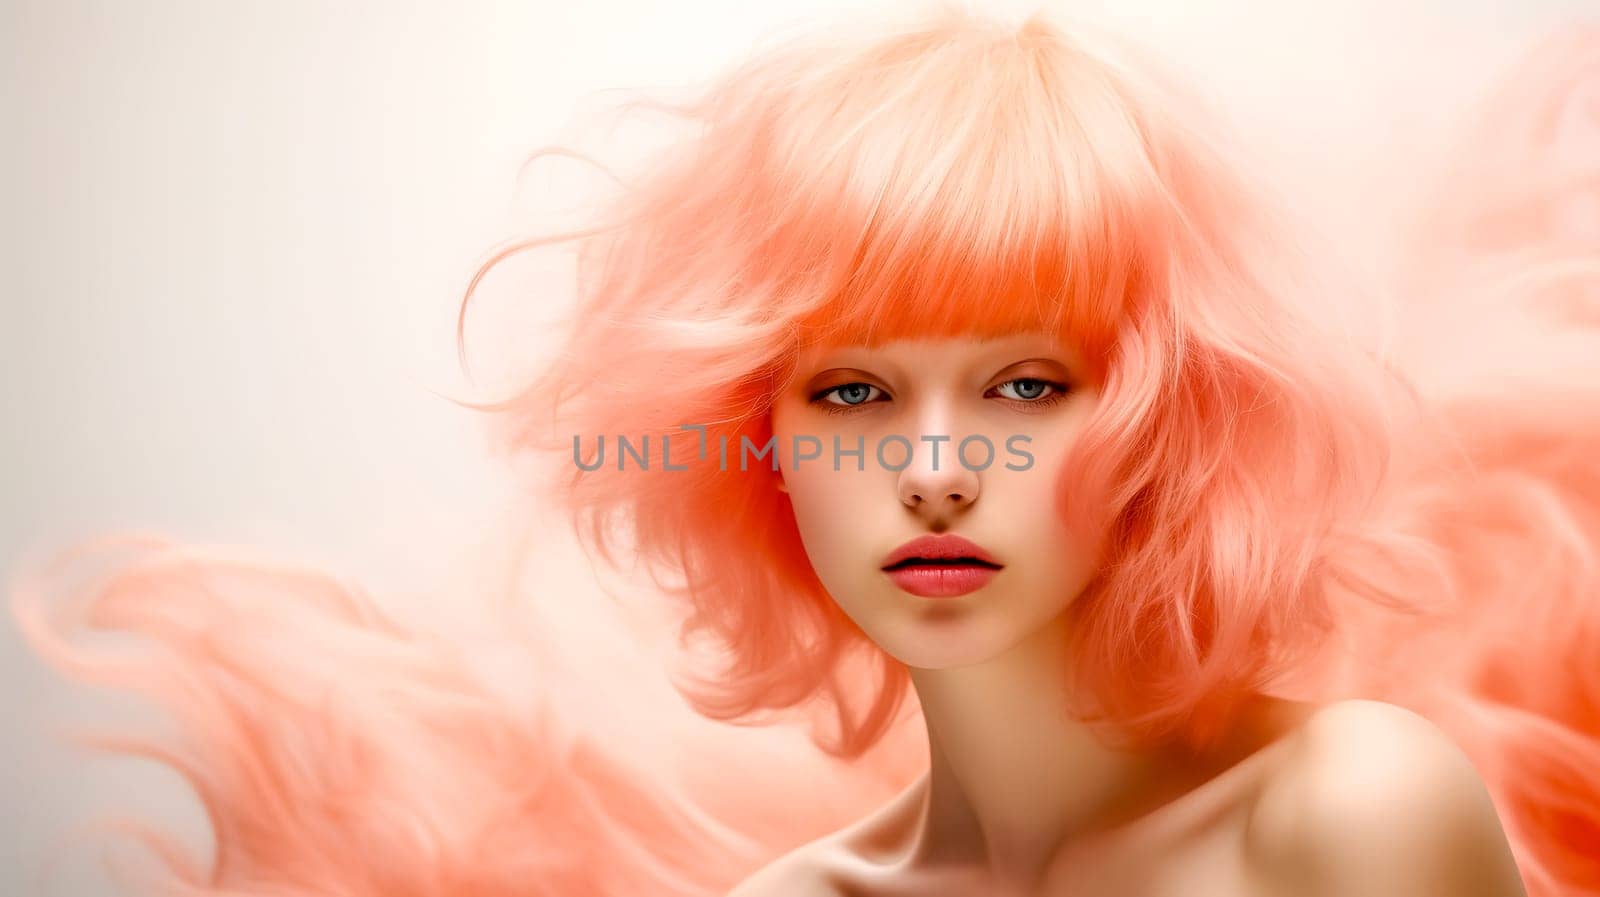 creative portrait of a beautiful young woman with peach-colored hair banner by Edophoto